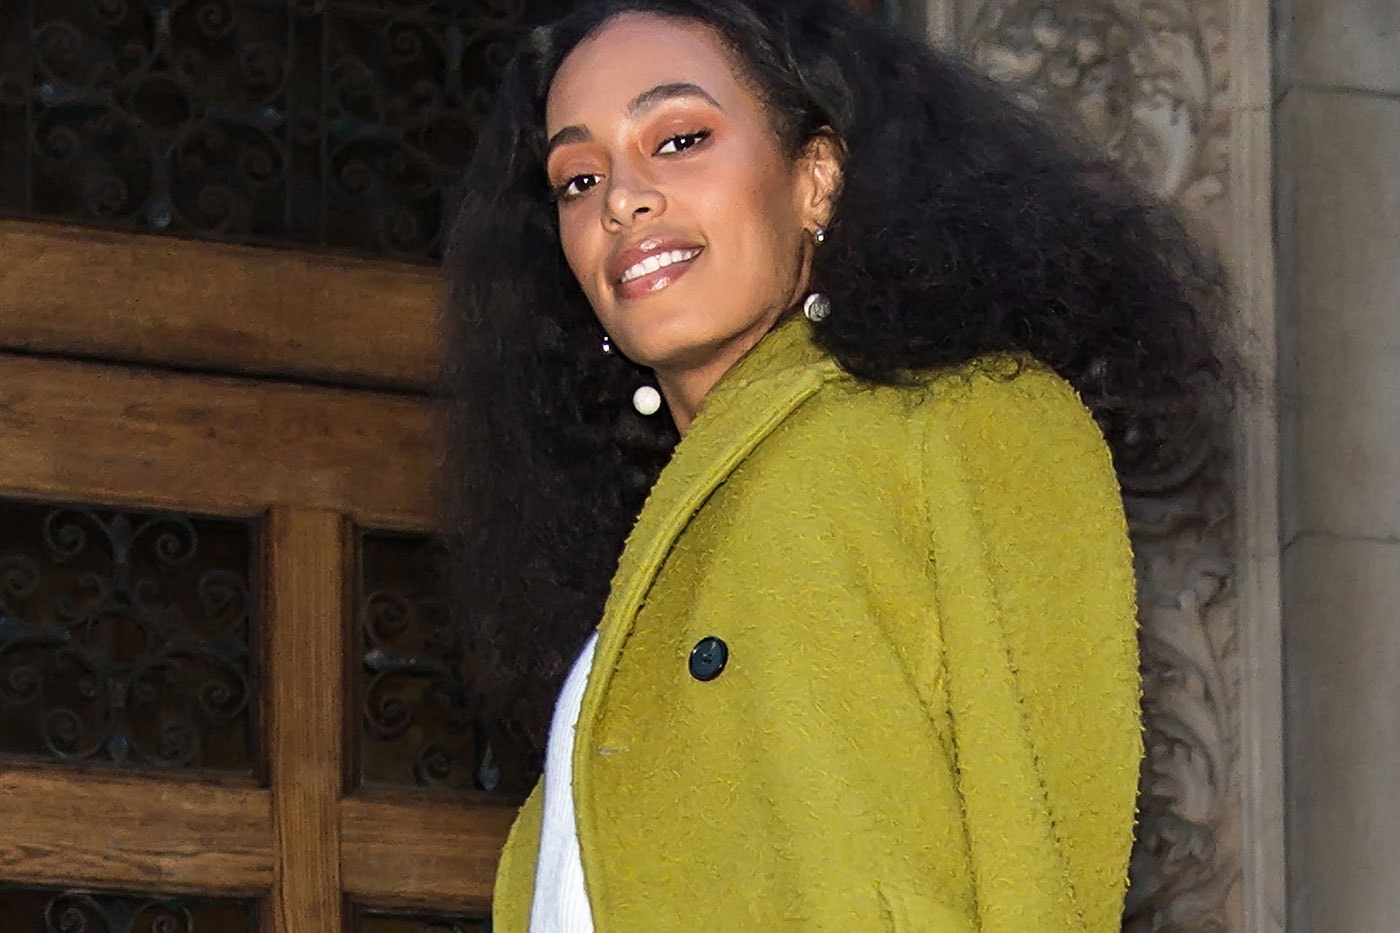 Watch Solange's “Don’t Touch My Hair” & “Cranes in the Sky” Videos